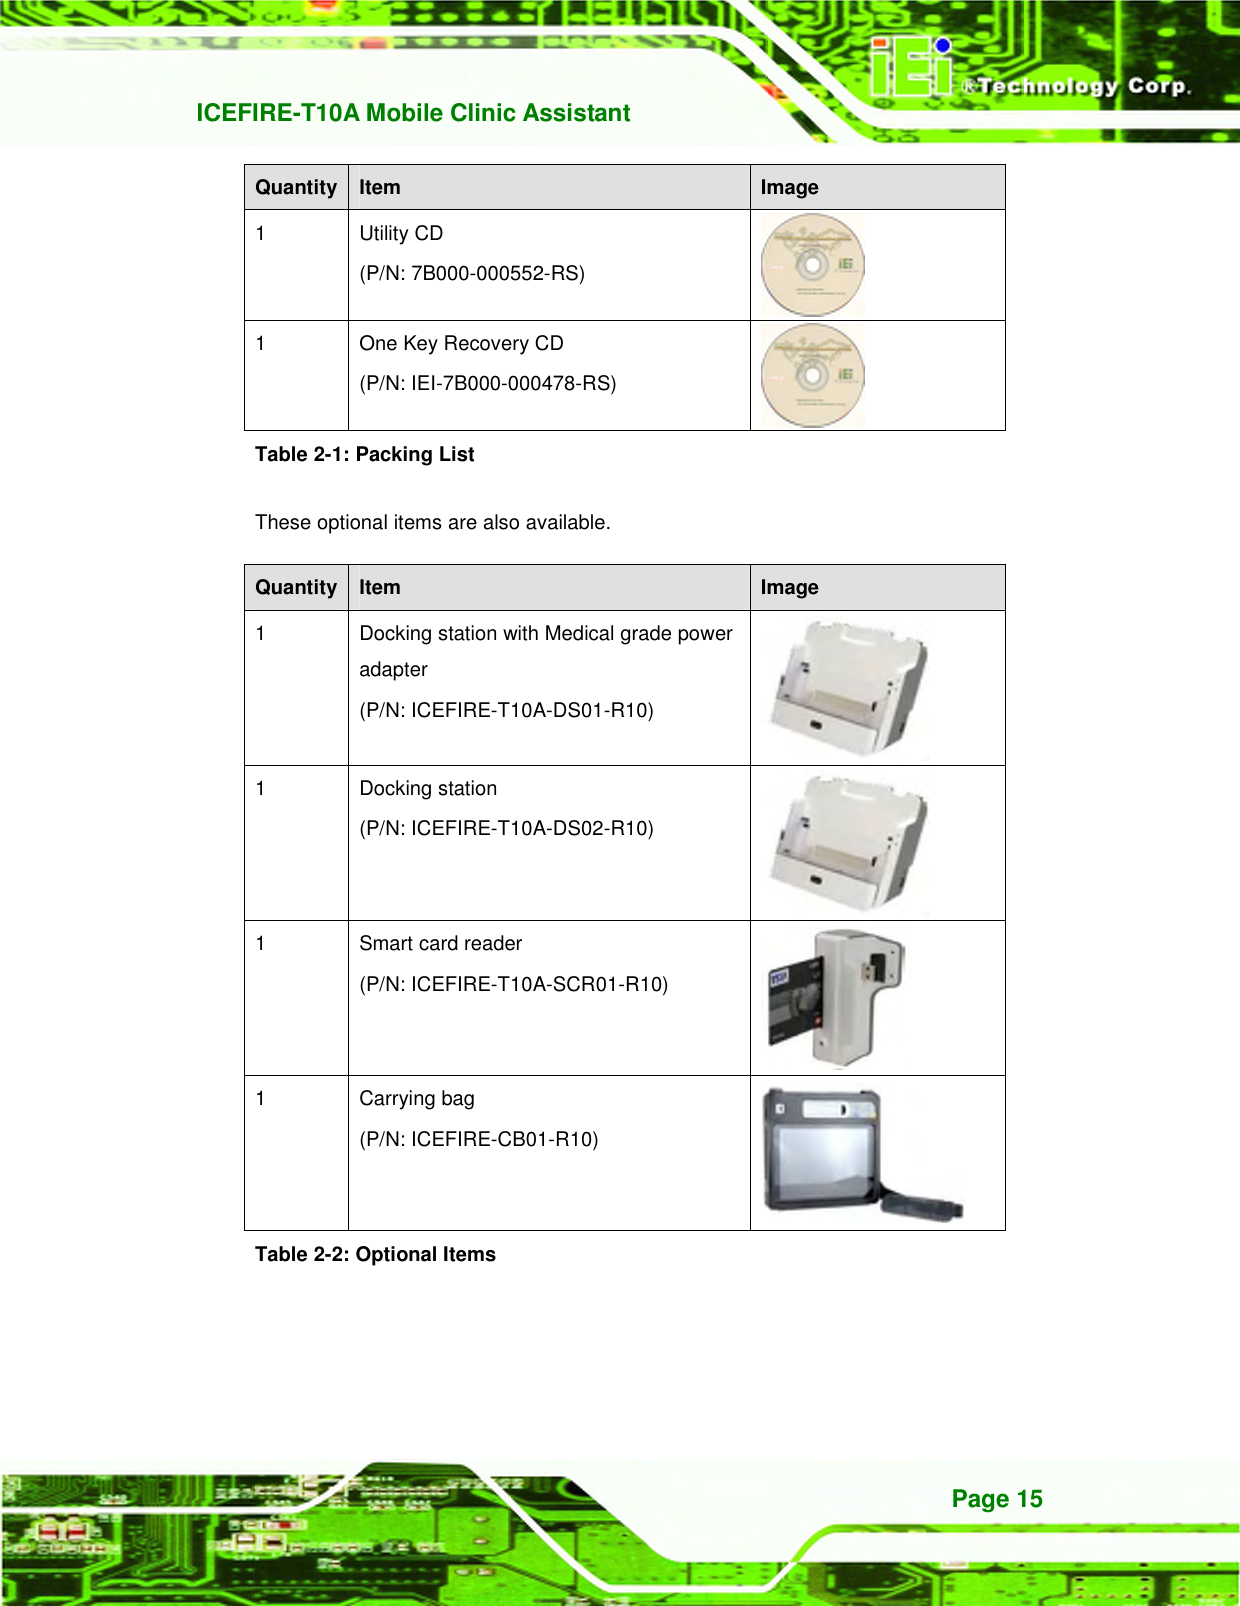   ICEFIRE-T10A Mobile Clinic Assistant Page 15 Quantity Item  Image 1  Utility CD (P/N: 7B000-000552-RS)  1    One Key Recovery CD (P/N: IEI-7B000-000478-RS)  Table 2-1: Packing List These optional items are also available.   Quantity Item  Image 1  Docking station with Medical grade power adapter (P/N: ICEFIRE-T10A-DS01-R10)  1  Docking station   (P/N: ICEFIRE-T10A-DS02-R10)  1  Smart card reader (P/N: ICEFIRE-T10A-SCR01-R10)  1  Carrying bag (P/N: ICEFIRE-CB01-R10)  Table 2-2: Optional Items 